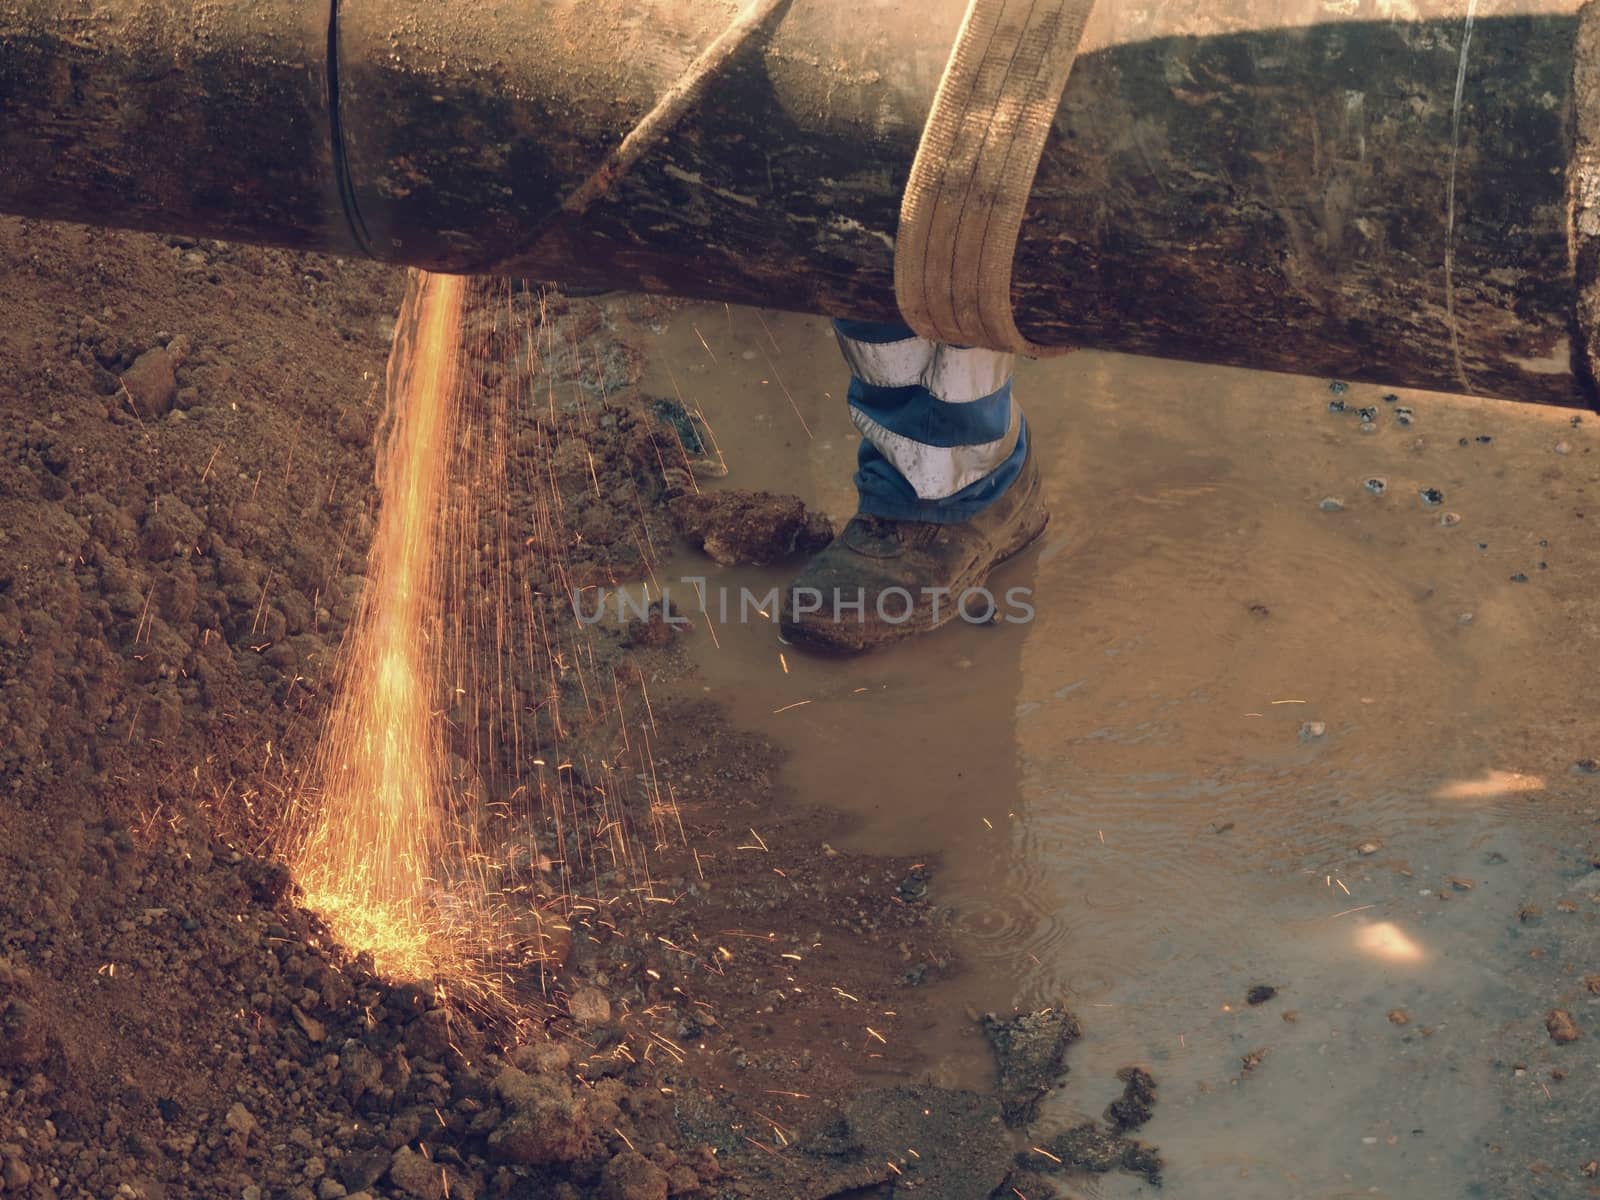 Man works, big pipe cutting with electric spiral machine. Hor sparks flying away from cut place.